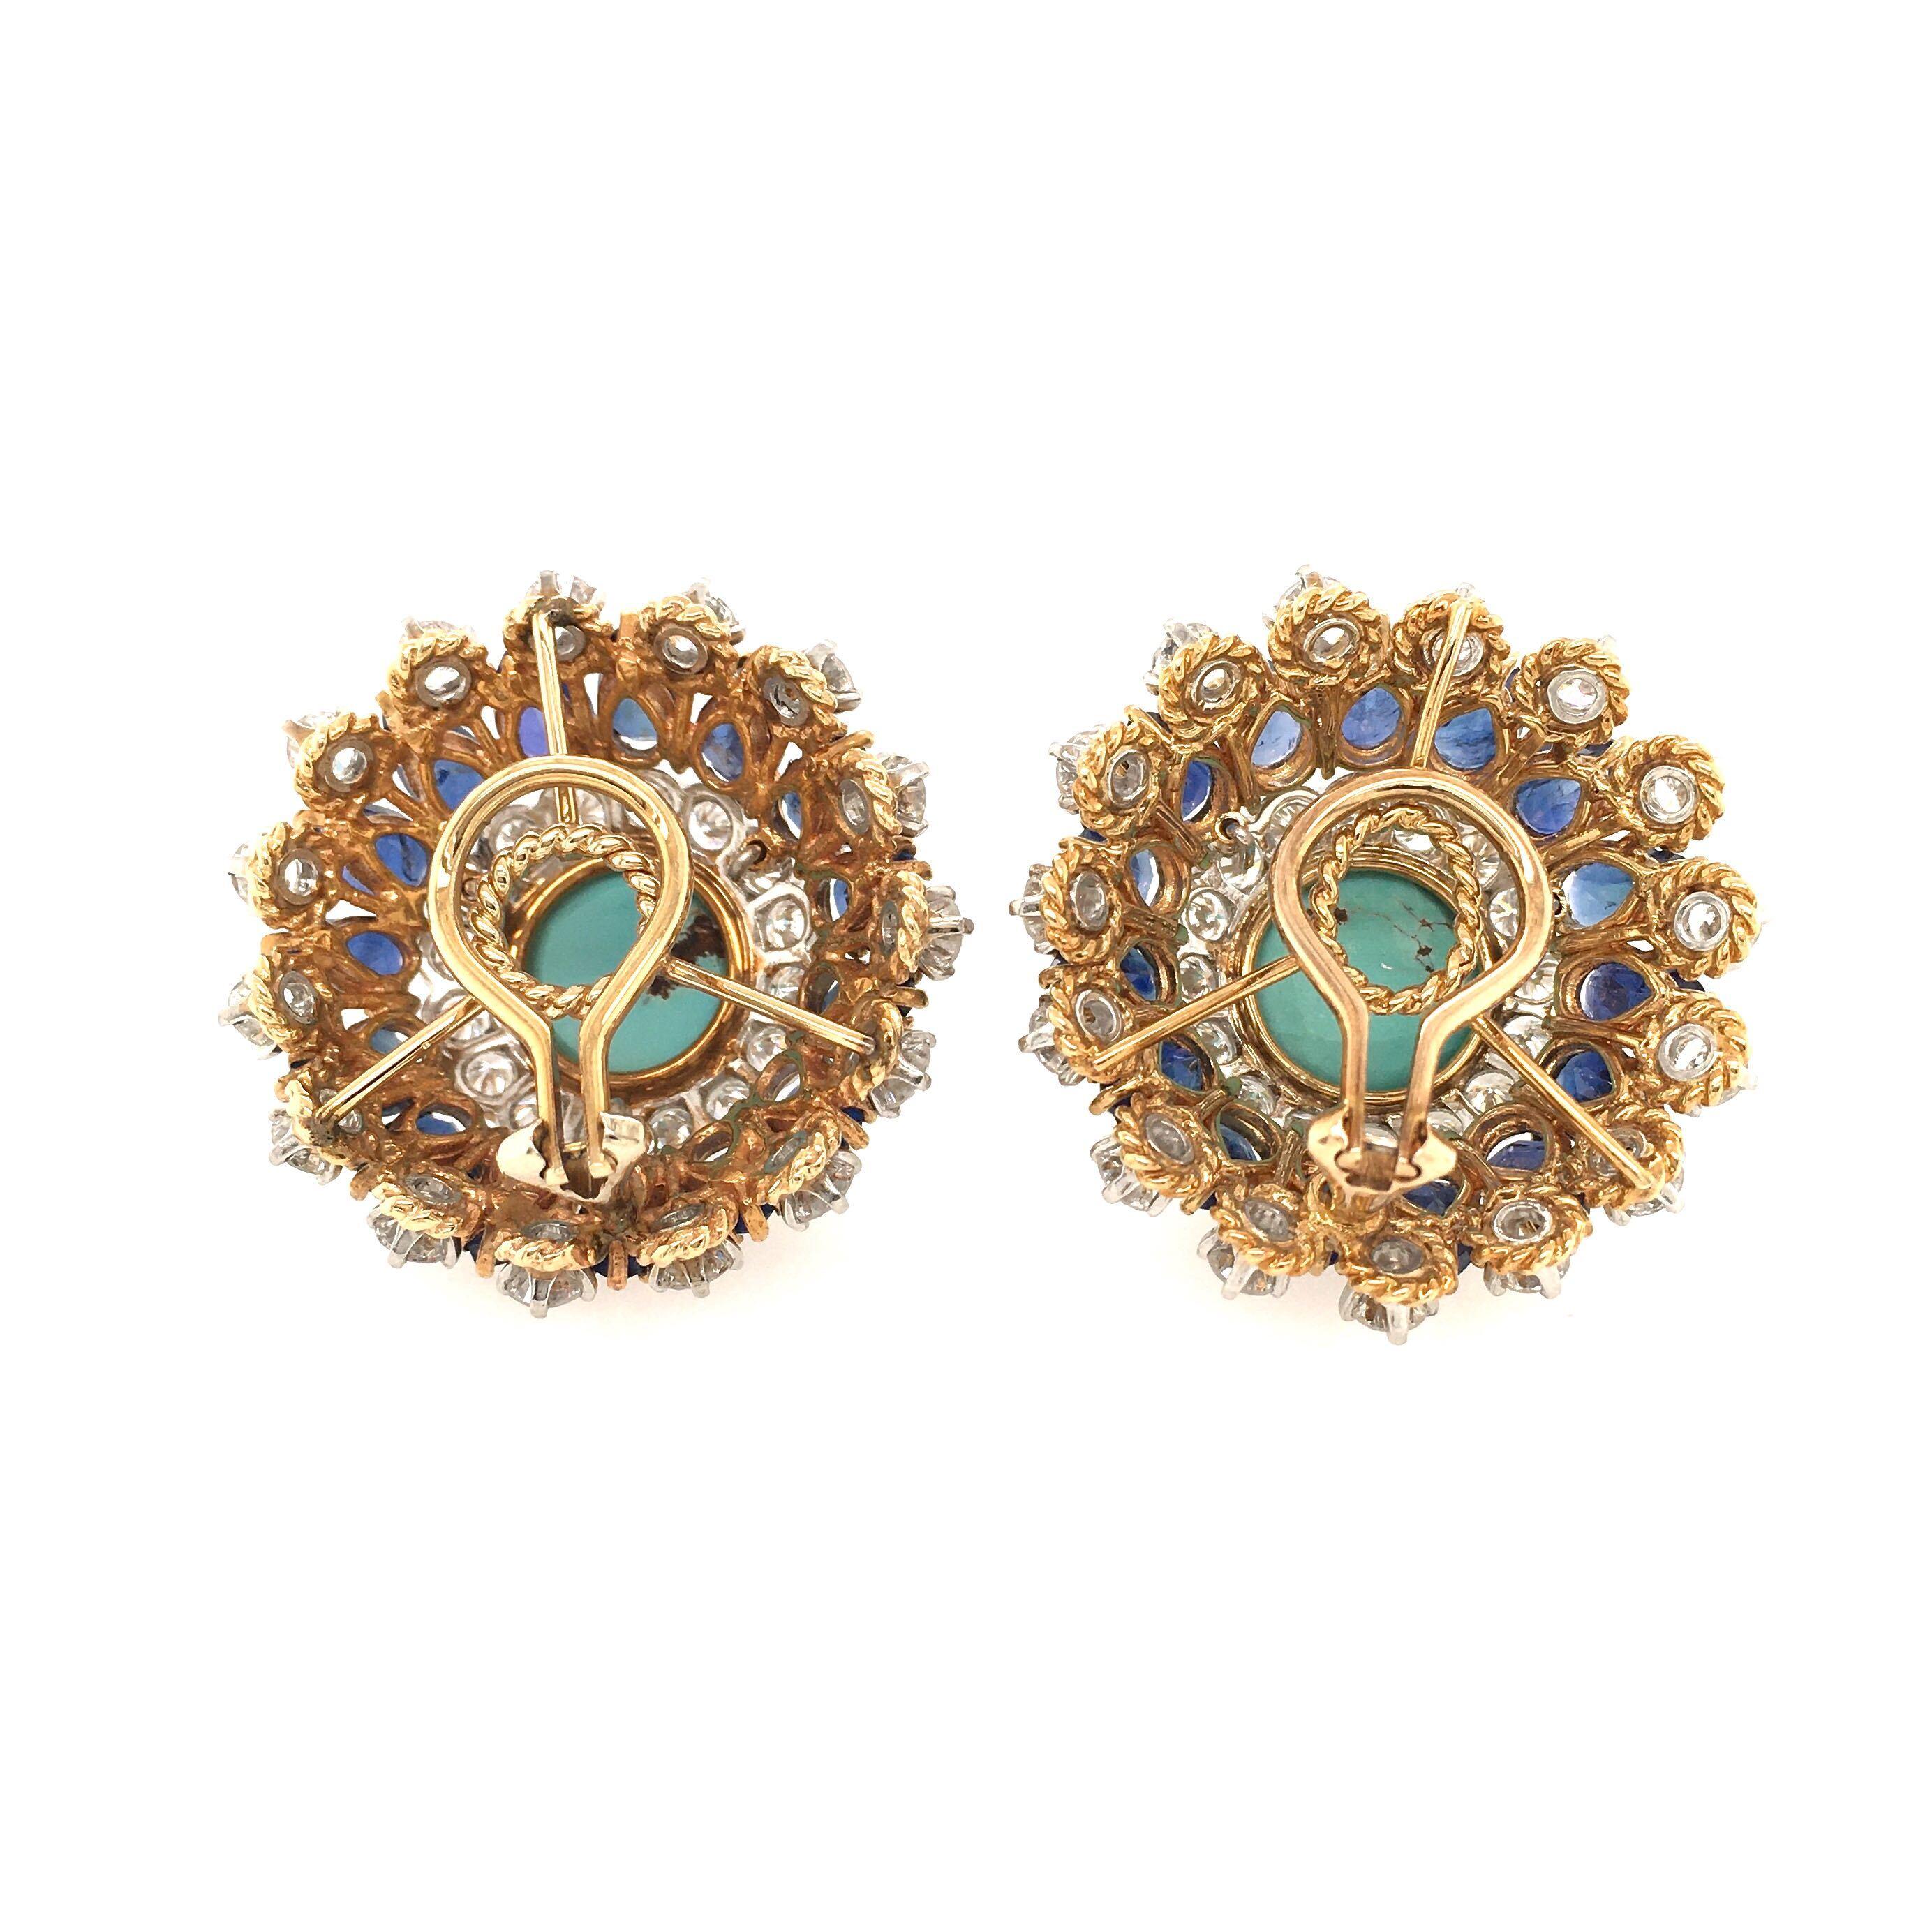 Cabochon Pair of Yellow Gold, Turquoise, Sapphire and Diamond Earrings